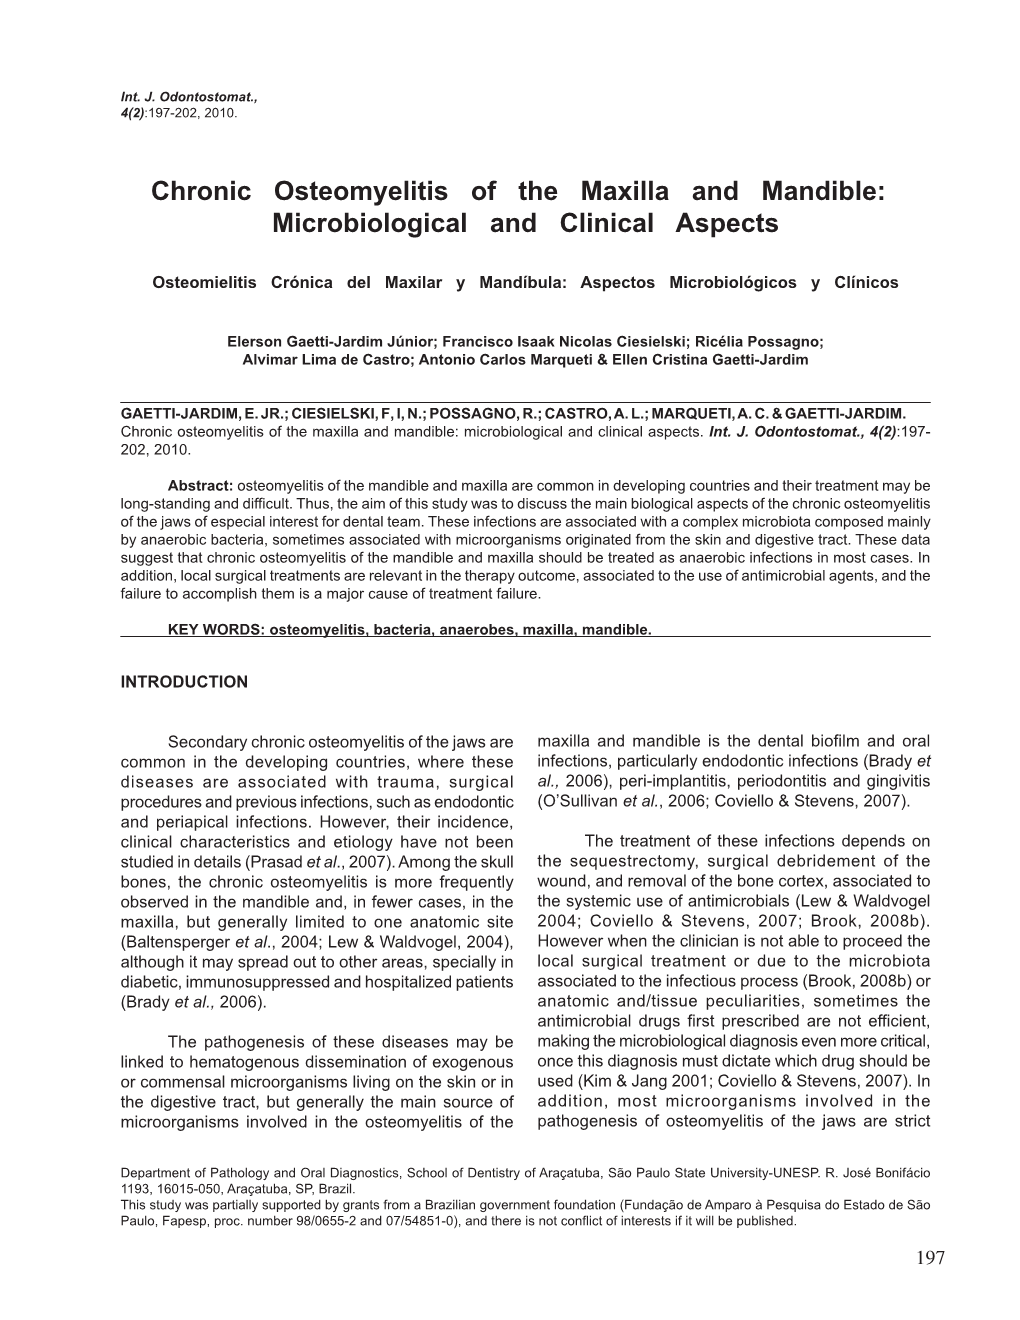 Chronic Osteomyelitis of the Maxilla and Mandible: Microbiological and Clinical Aspects